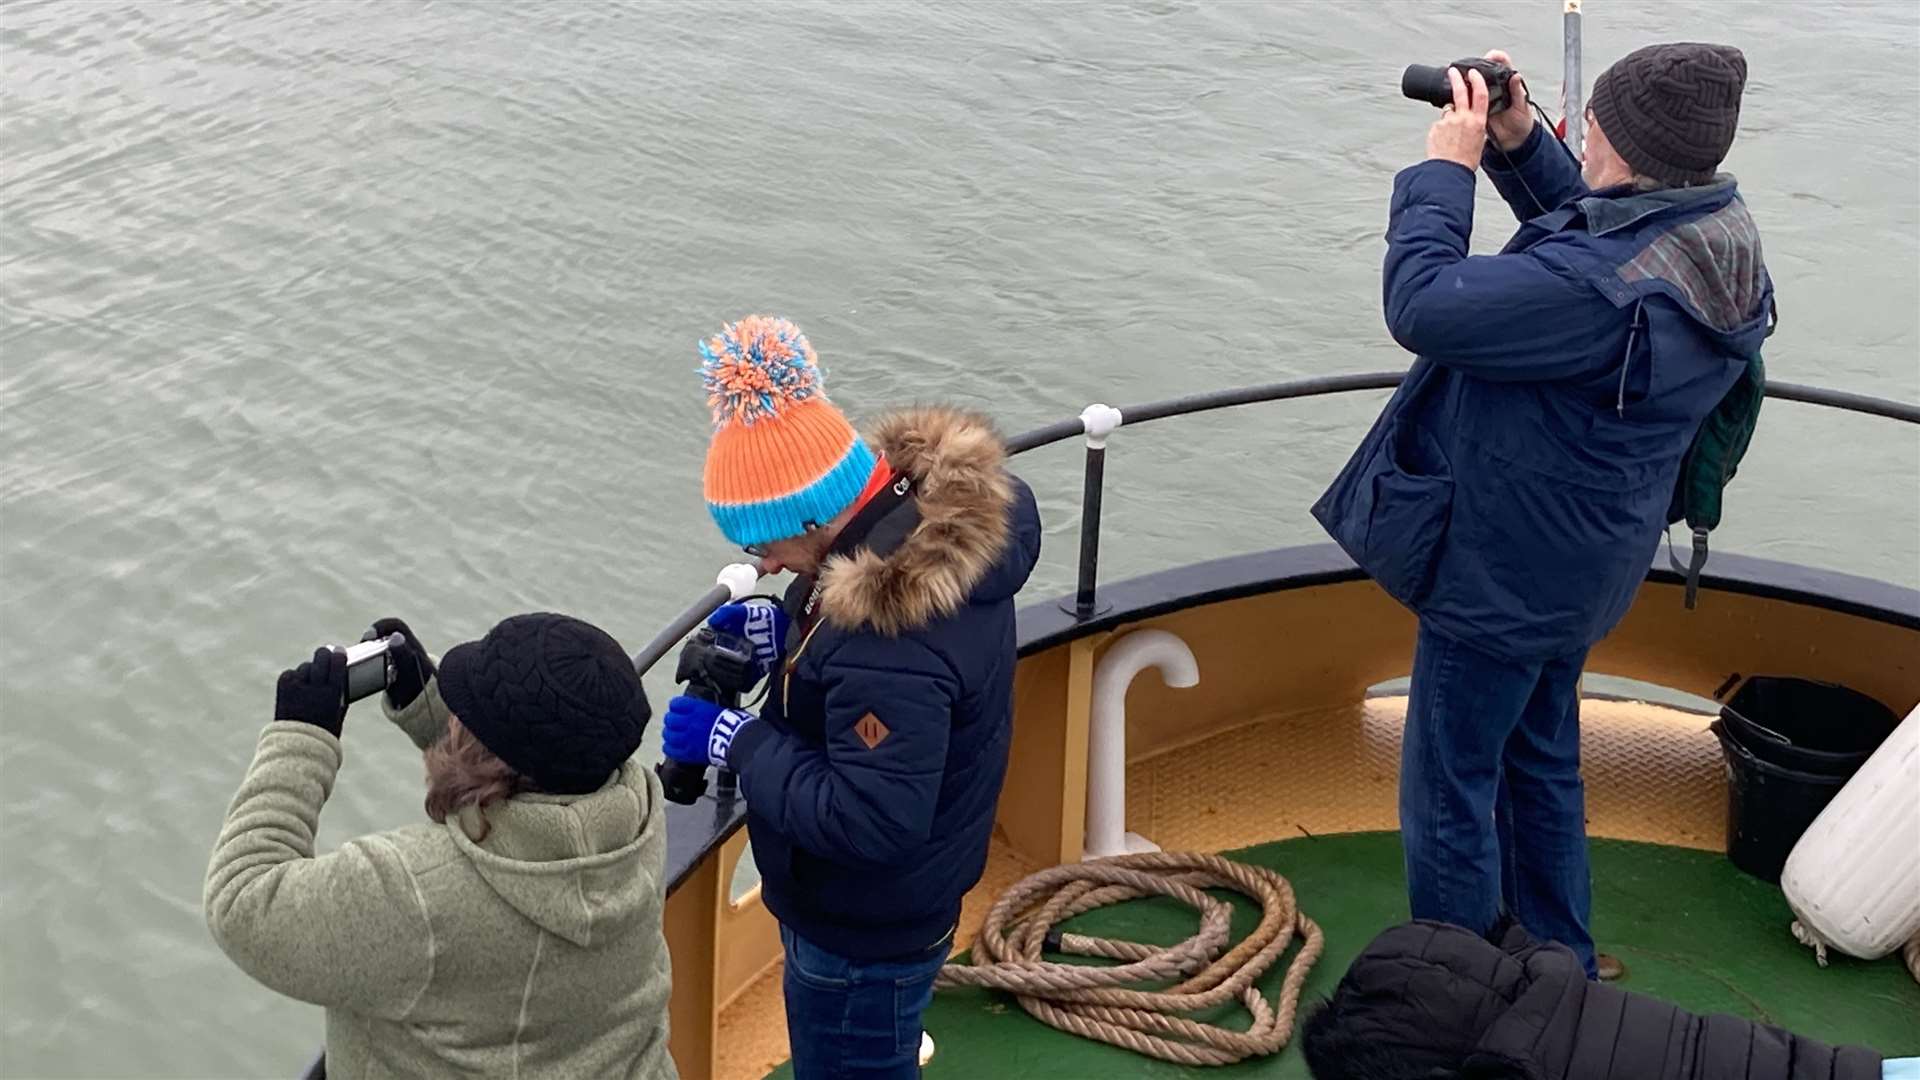 Photographers aboard the X-Pilot which is running trips to see the masts of the Sheppey bomb ship SS Richard Montgomery